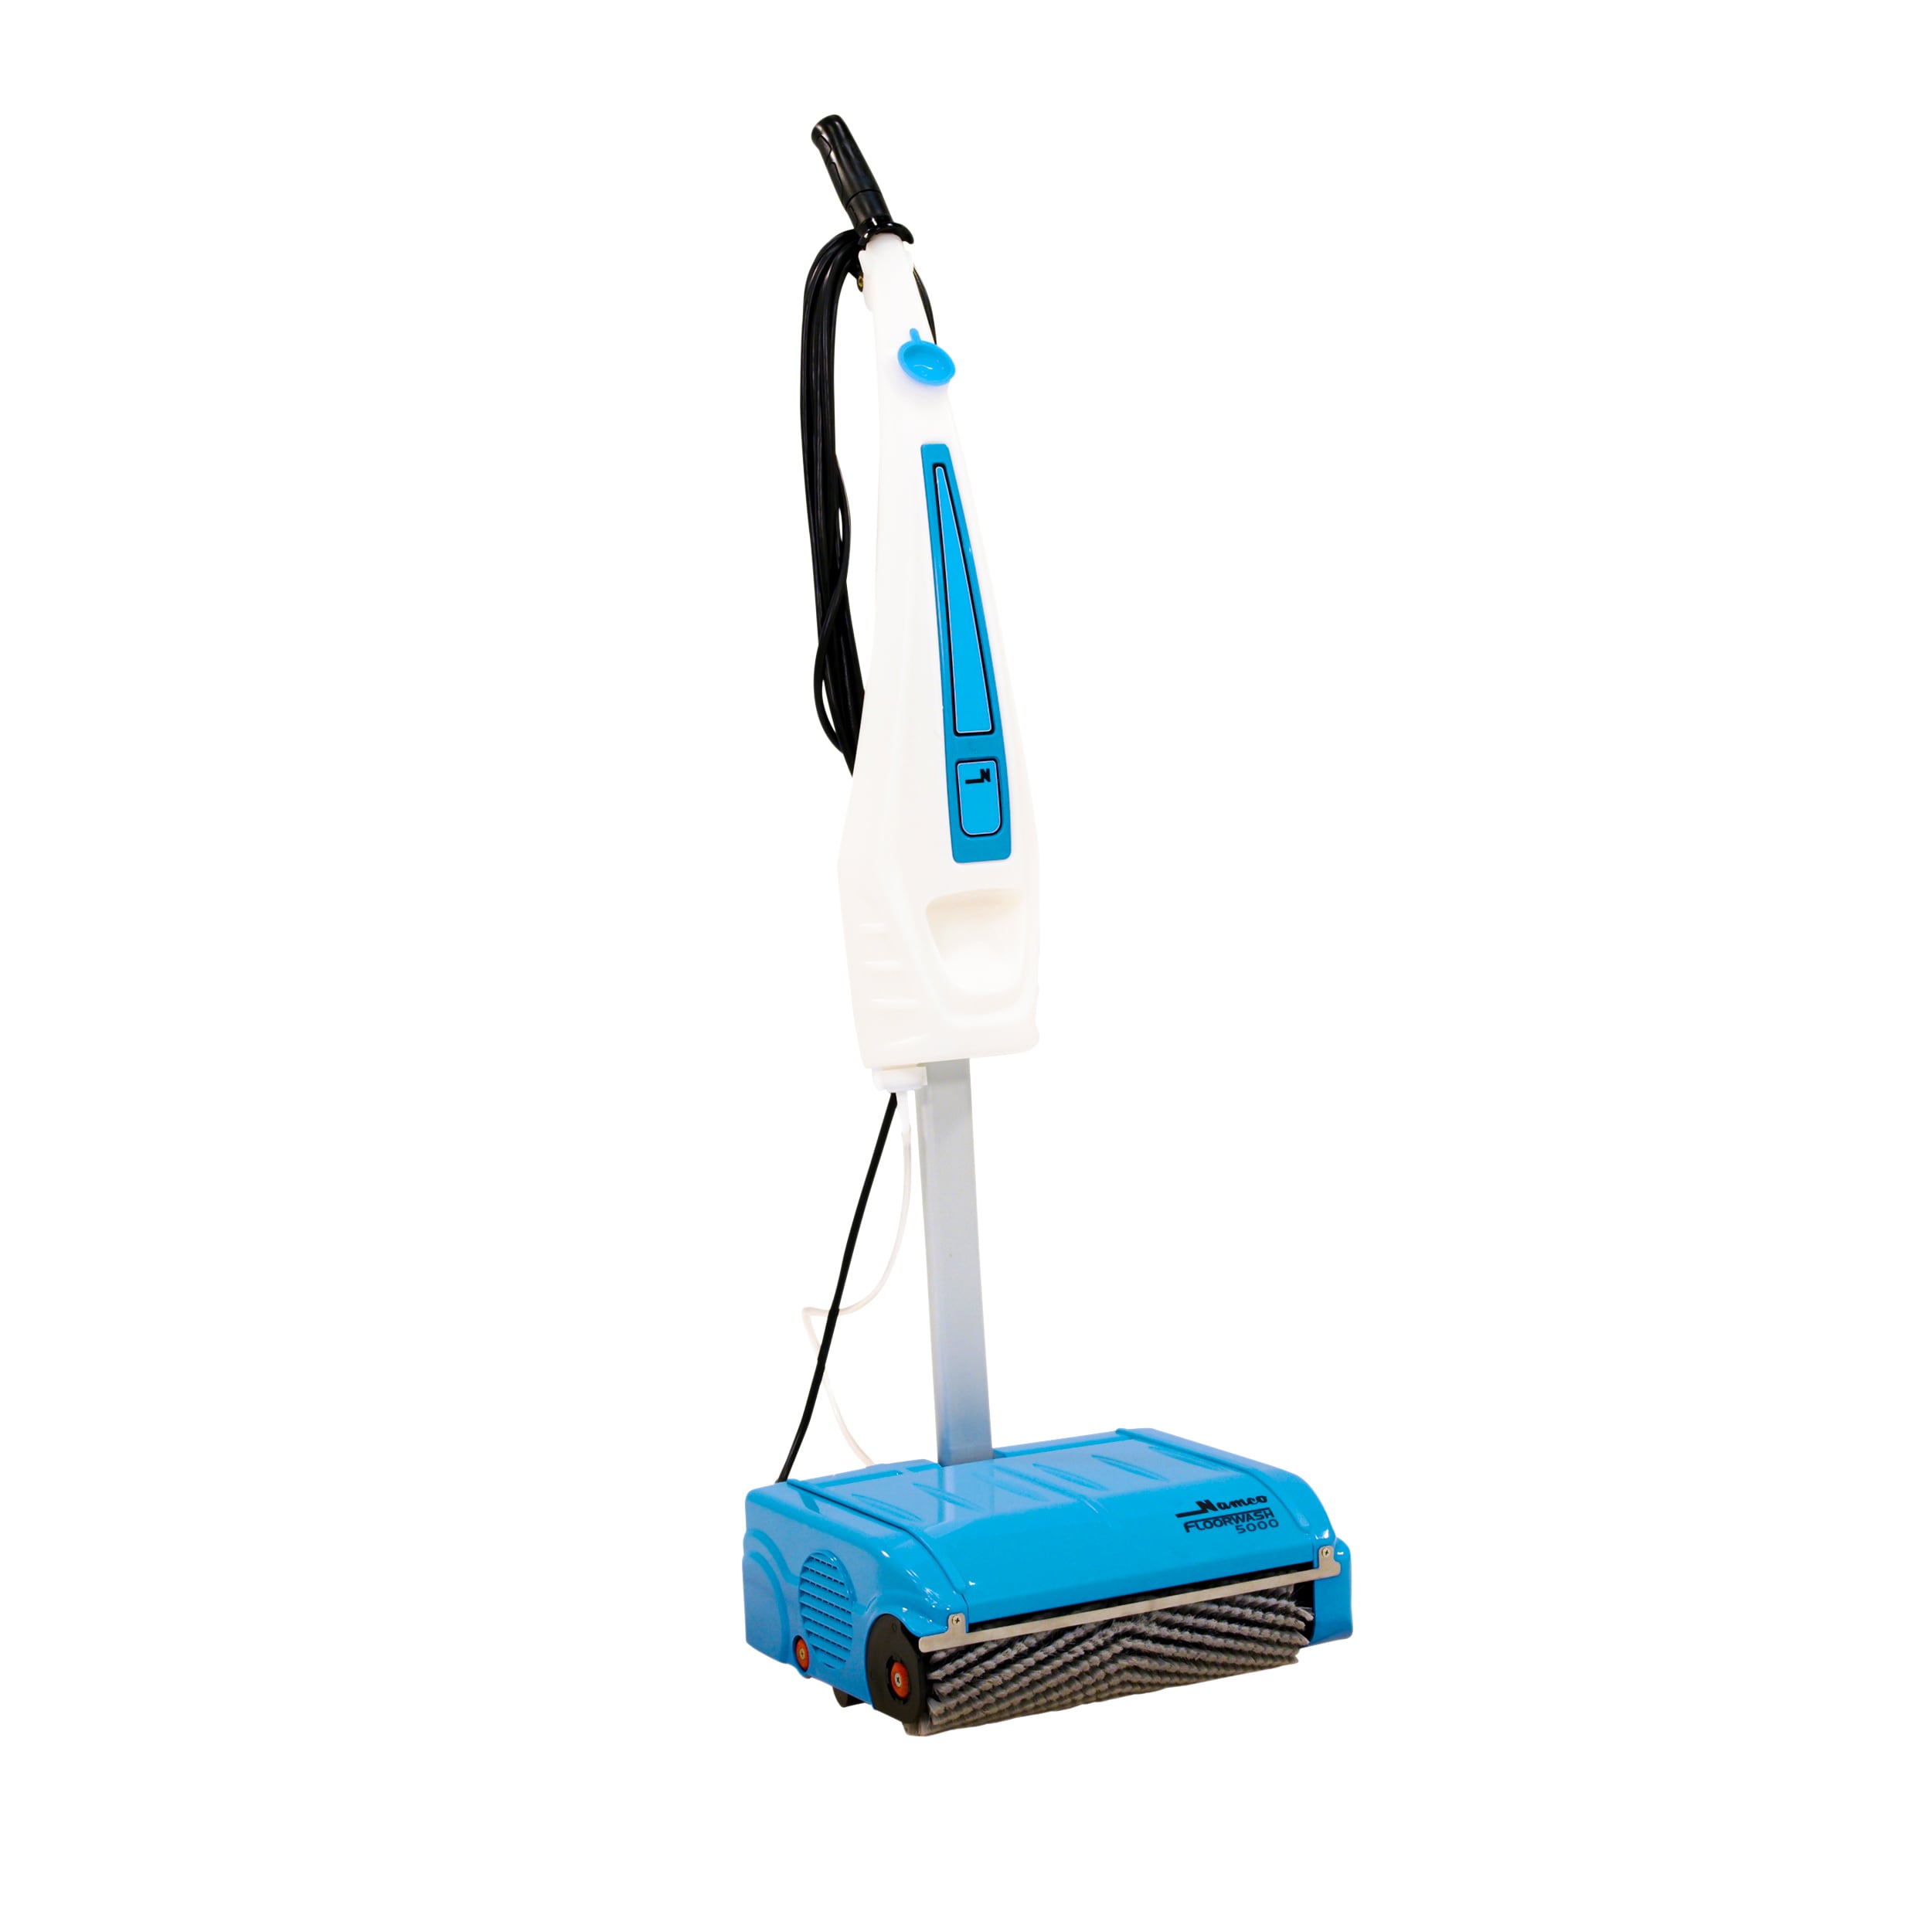 SICENXTOOLS Electric Grout Cleaner Machine | Lightweight Machine Safely  Cleans Grout Between Floor Tiles | Grout Cleaner for Tile Floors, Patio